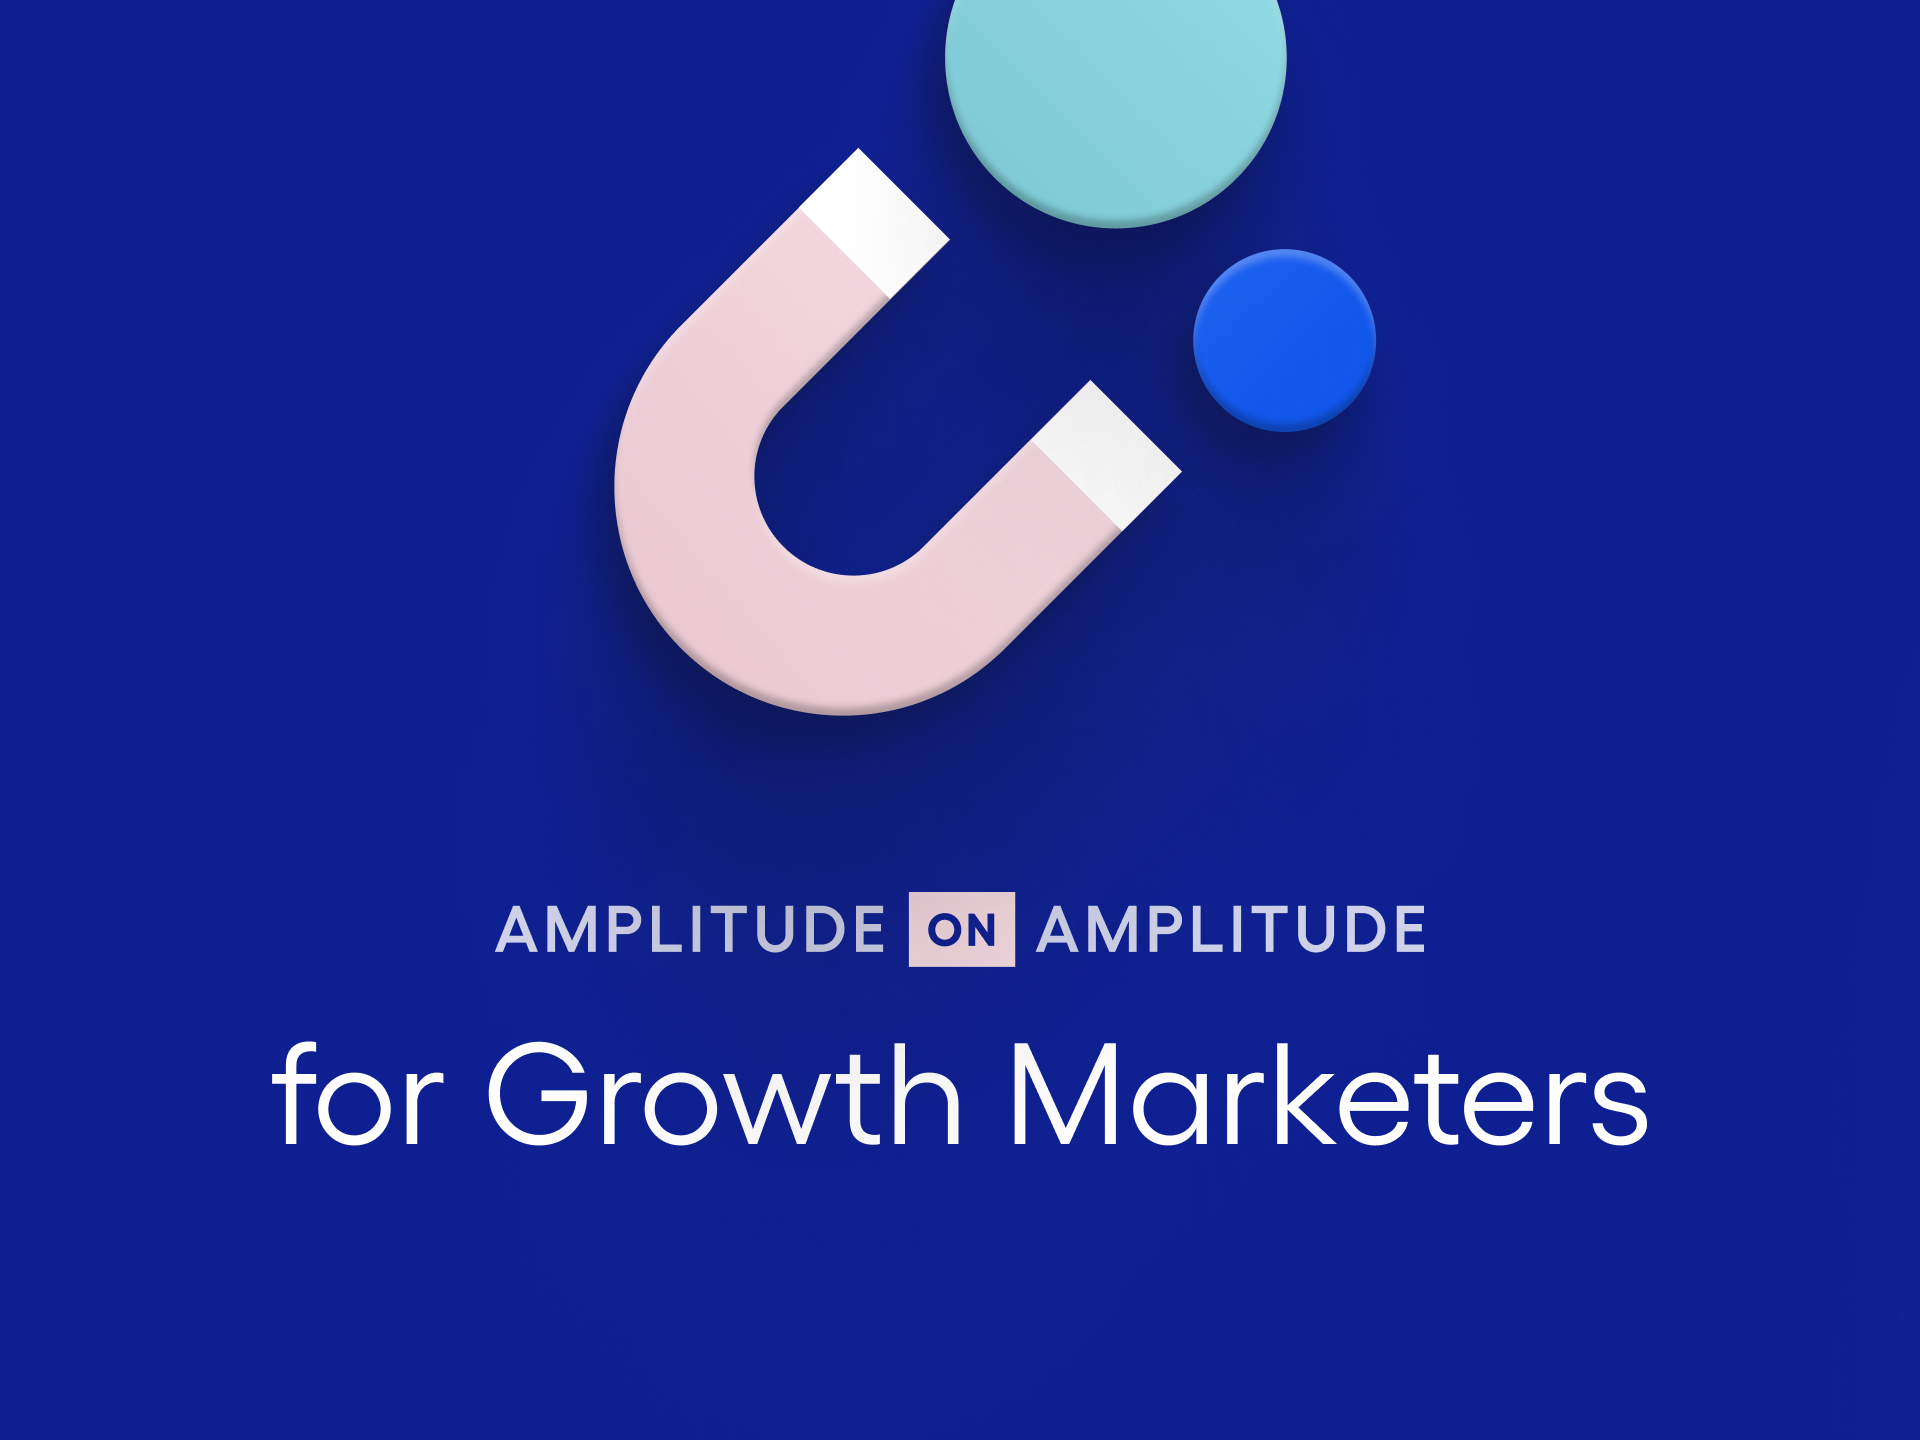 Amplitude for growth marketers with magnet pulling circles